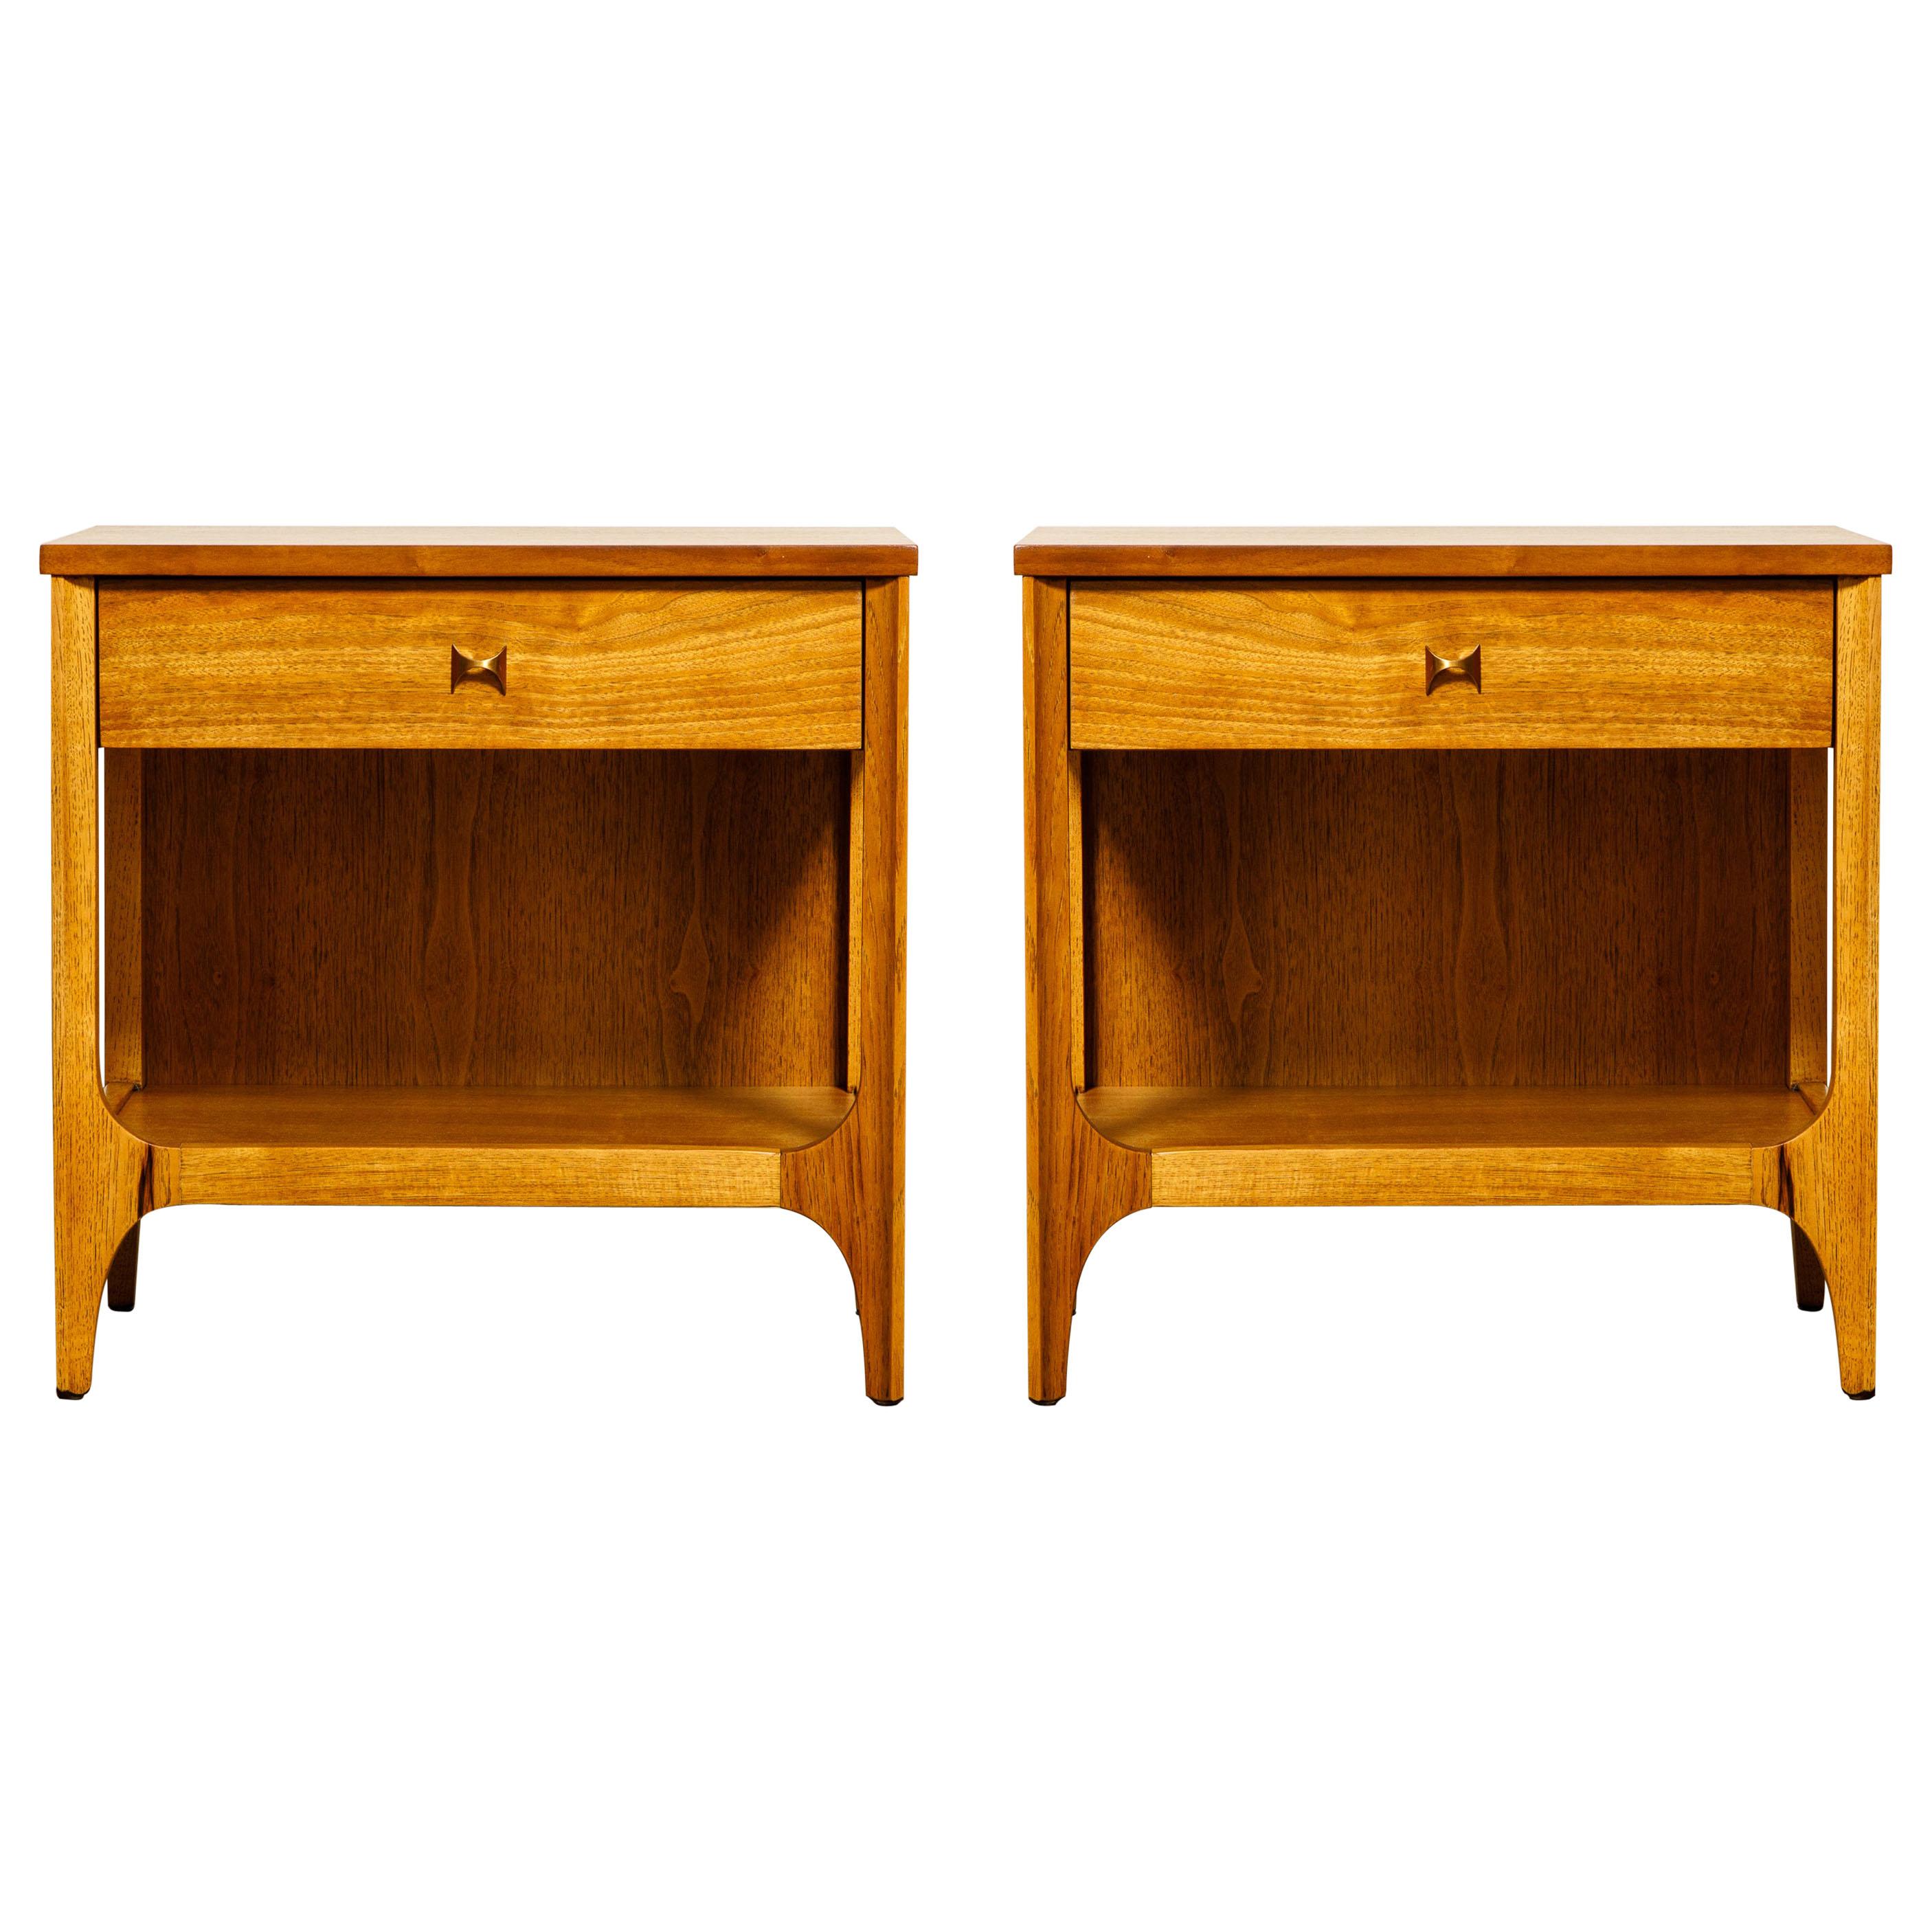 Pair of 'Brasilia' Bedside Tables by Broyhill Premiere, Refinished, 1960s